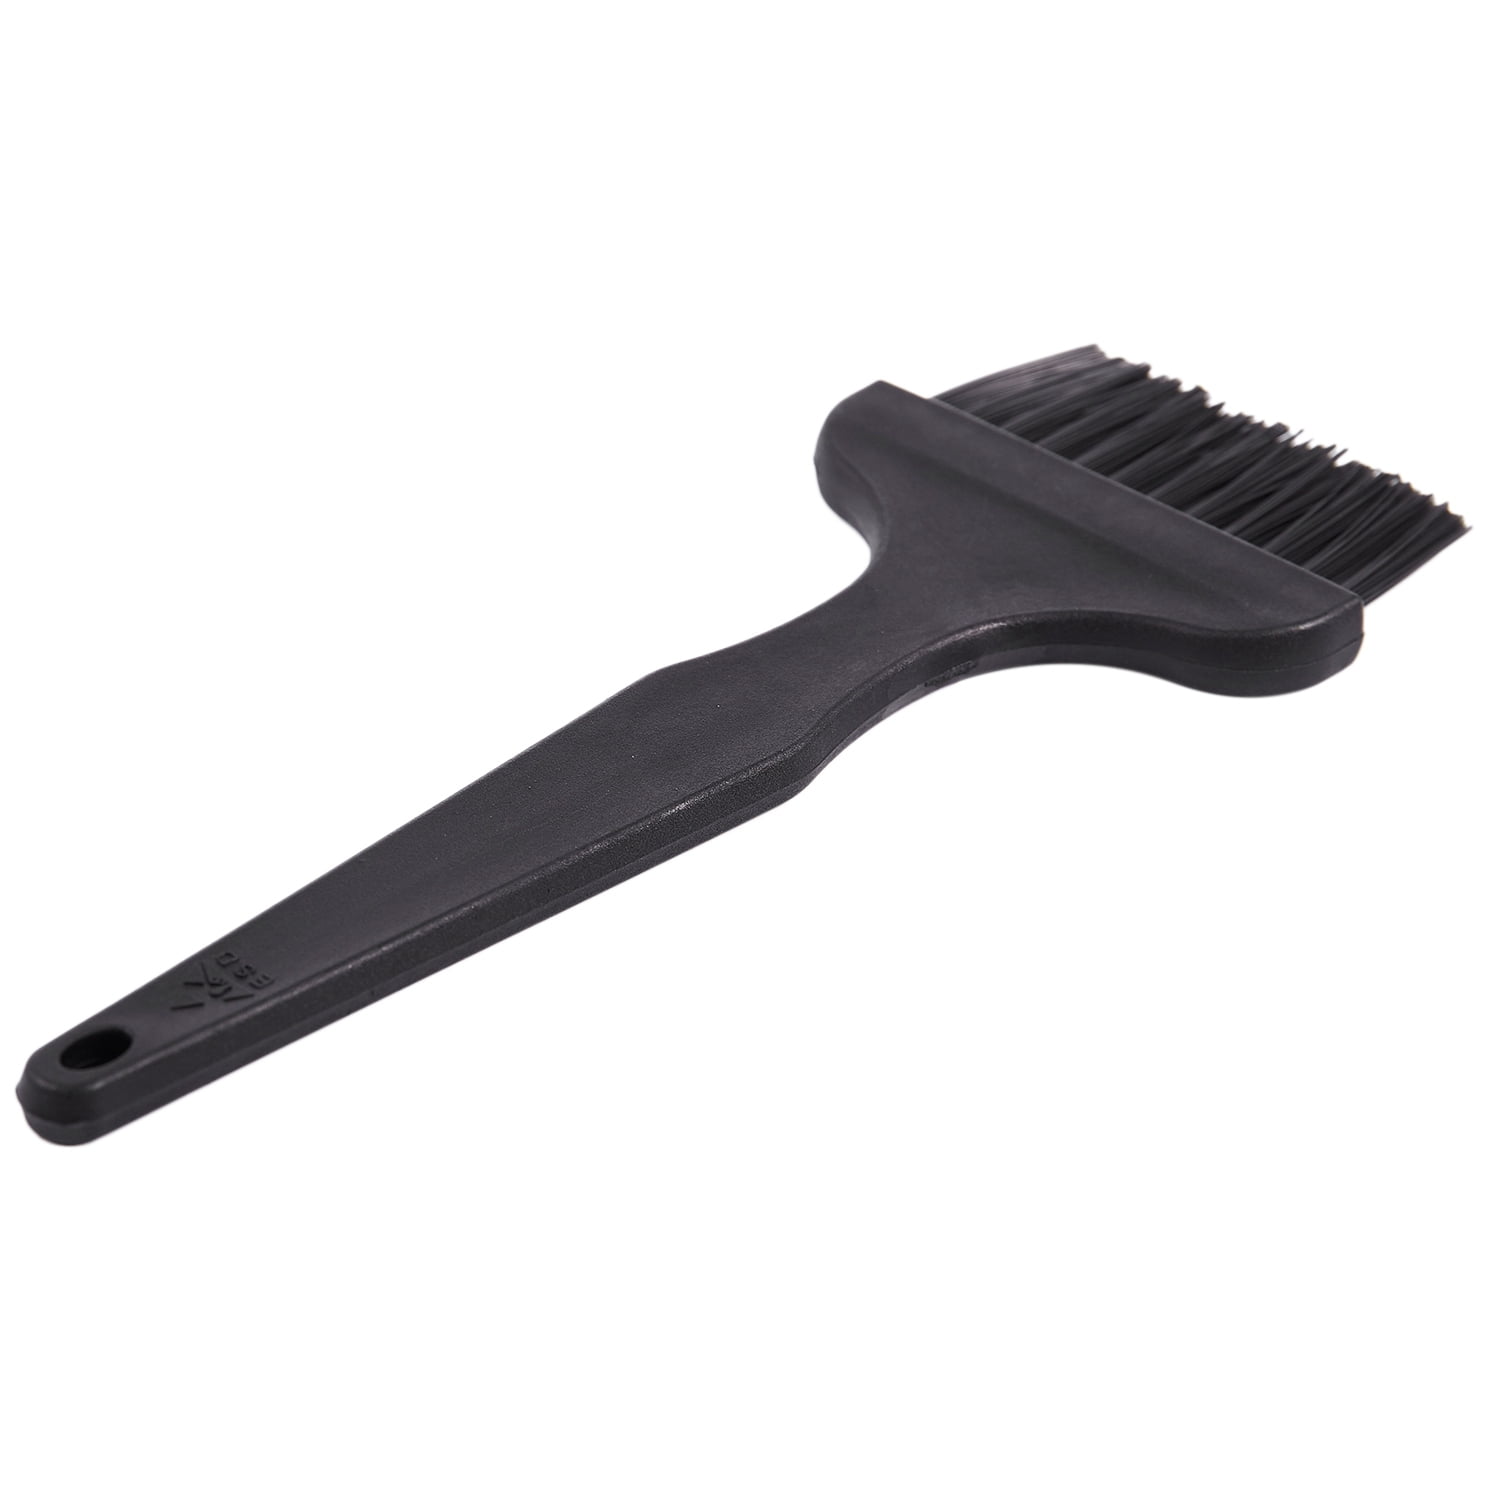 Anti Static ESD Cleaning Brush for PCB Motherboards Fans Keyboards E&F 